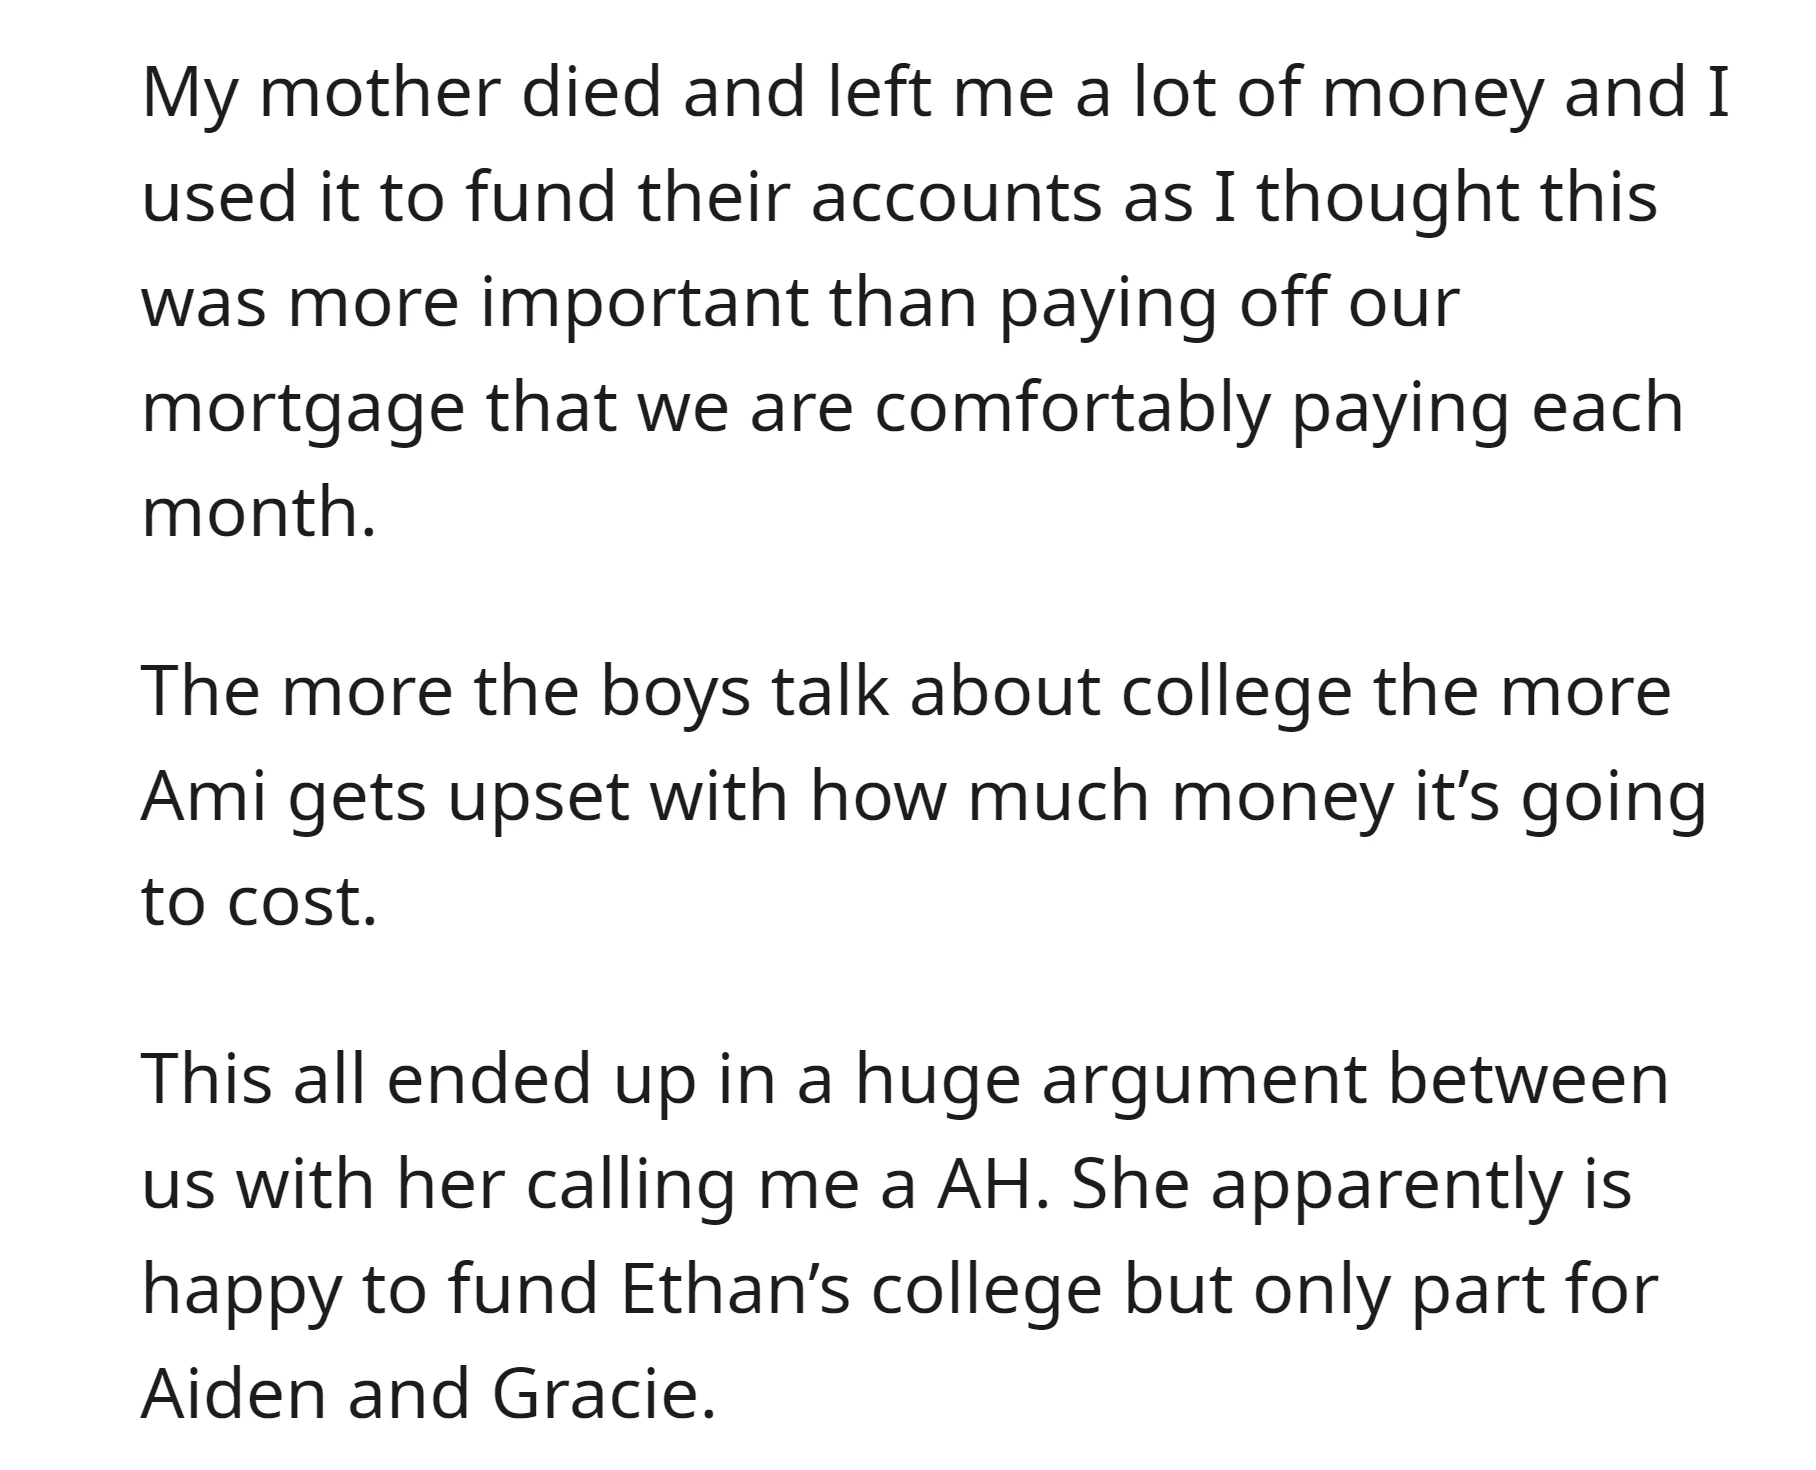 OP had a disagreement with his wife as she is willing to fully fund their biological son's college but only partially support adopted children